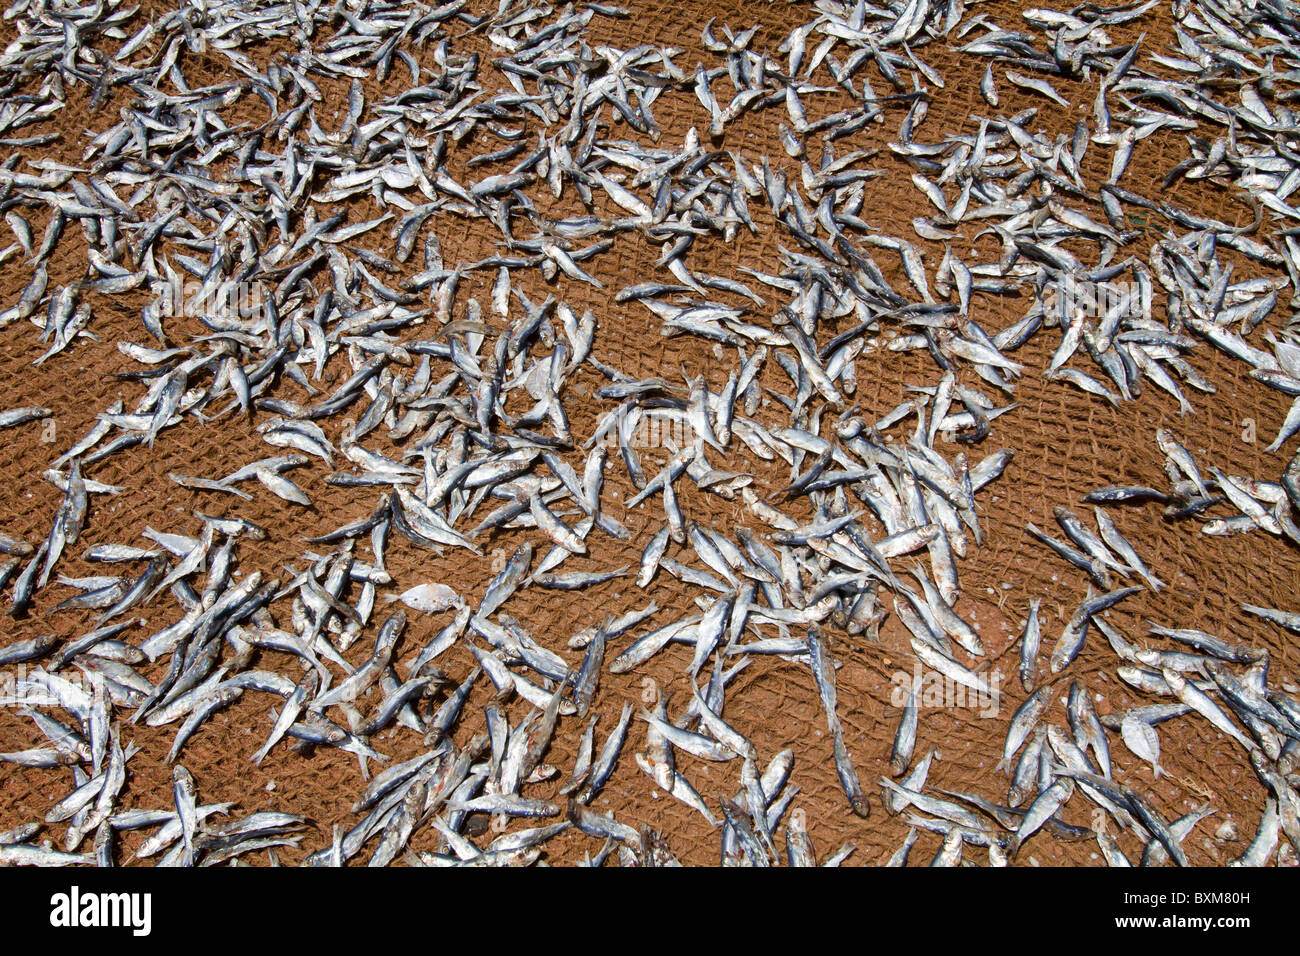 Sardines laid out to dry in the sun at Kinniya, near Trincomalee, Sri Lanka East Coast. Dried fish is a major source of protein. Stock Photo